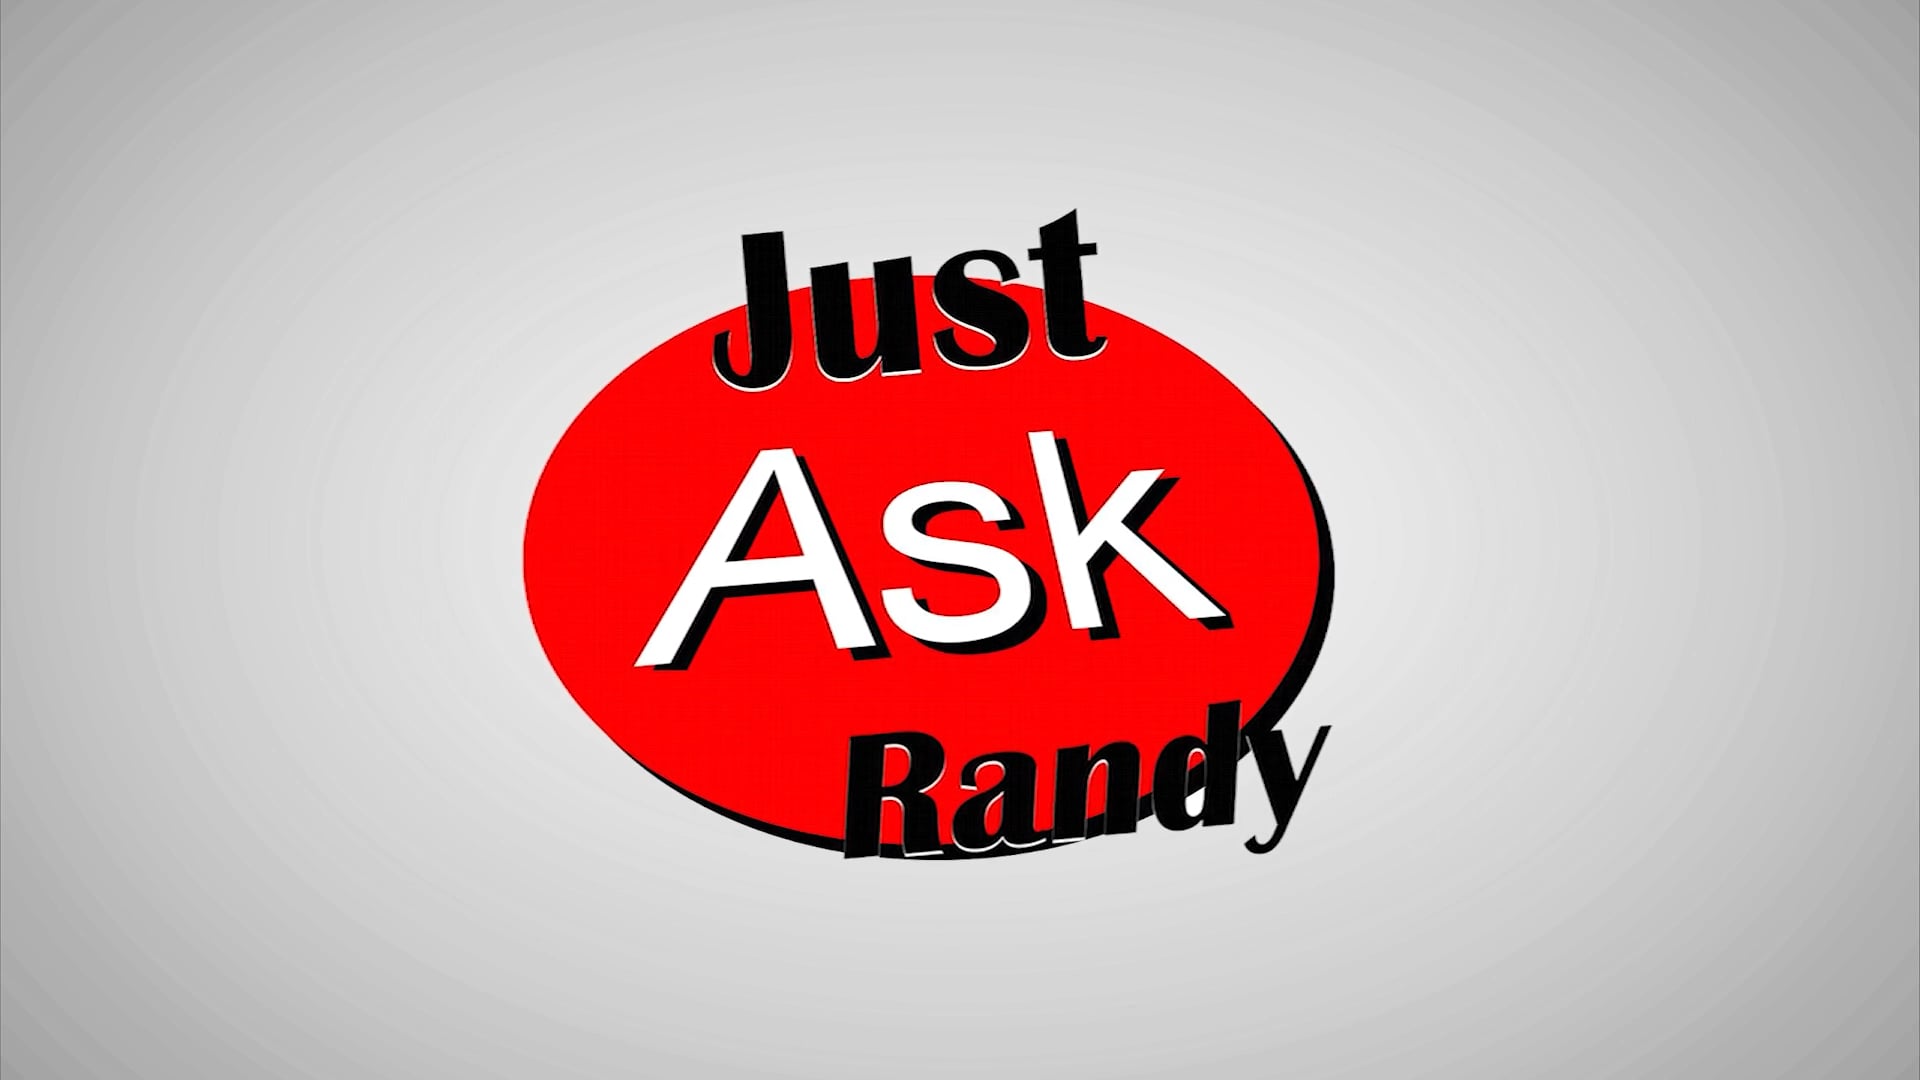 Just Ask Randy